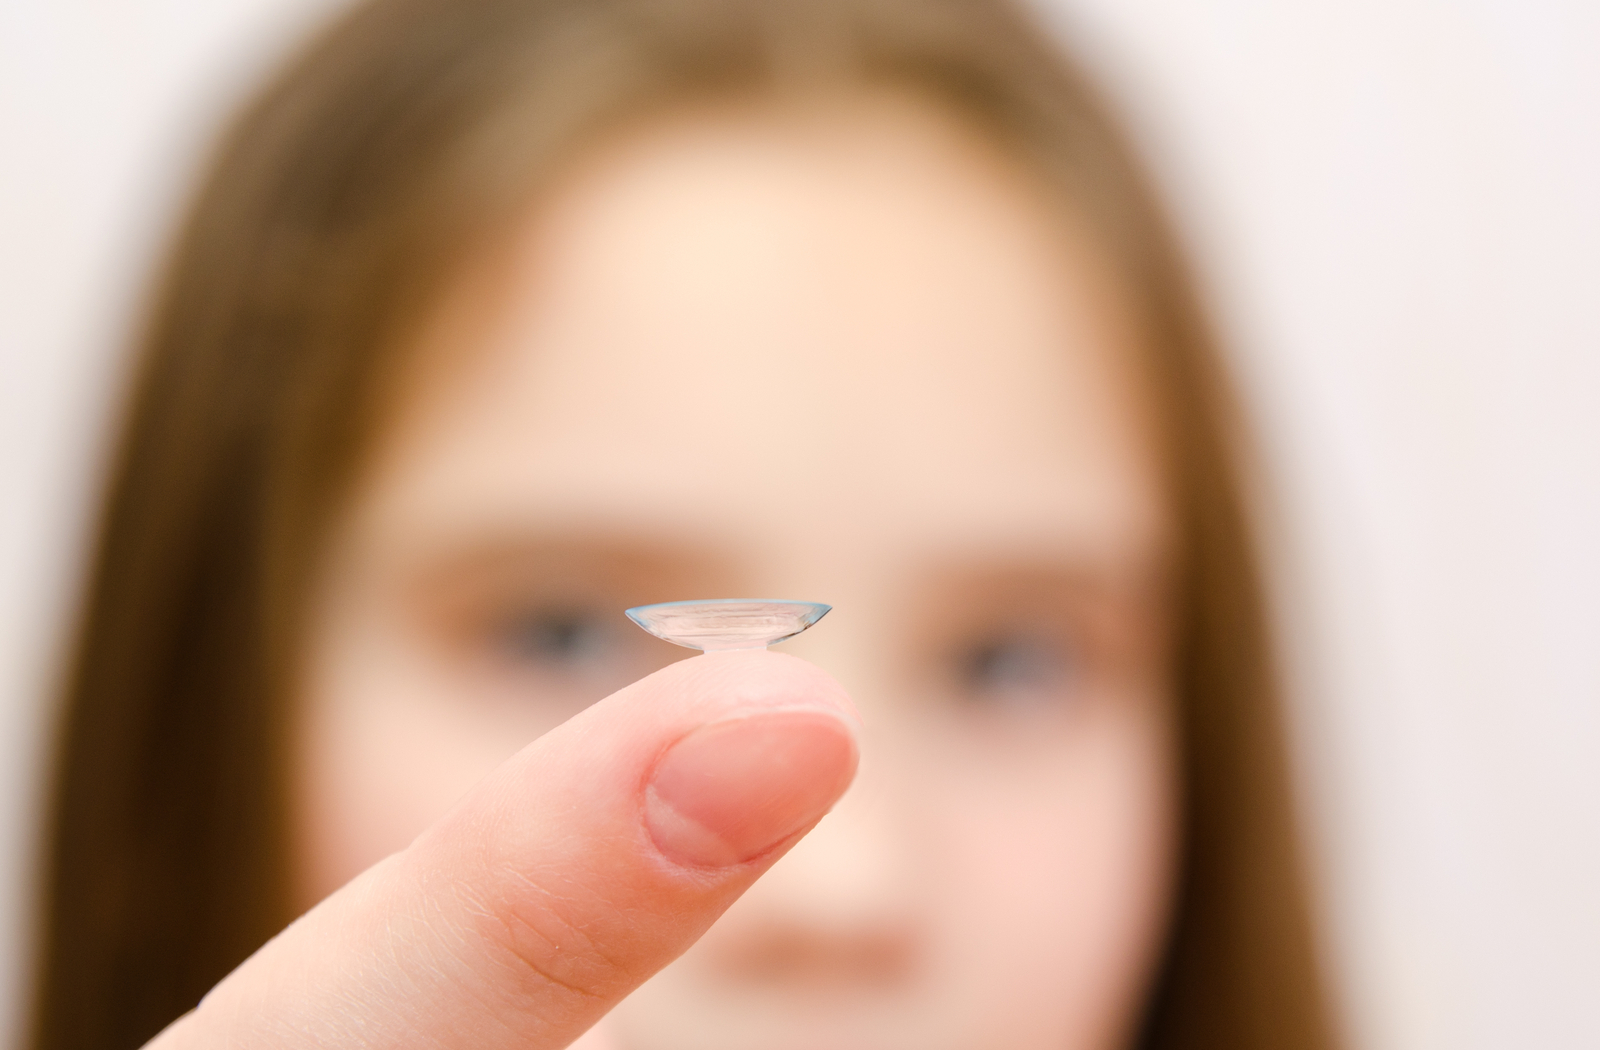 Child with long hair out of focus holding a contact lens for myopia control in focus on her pointer finger